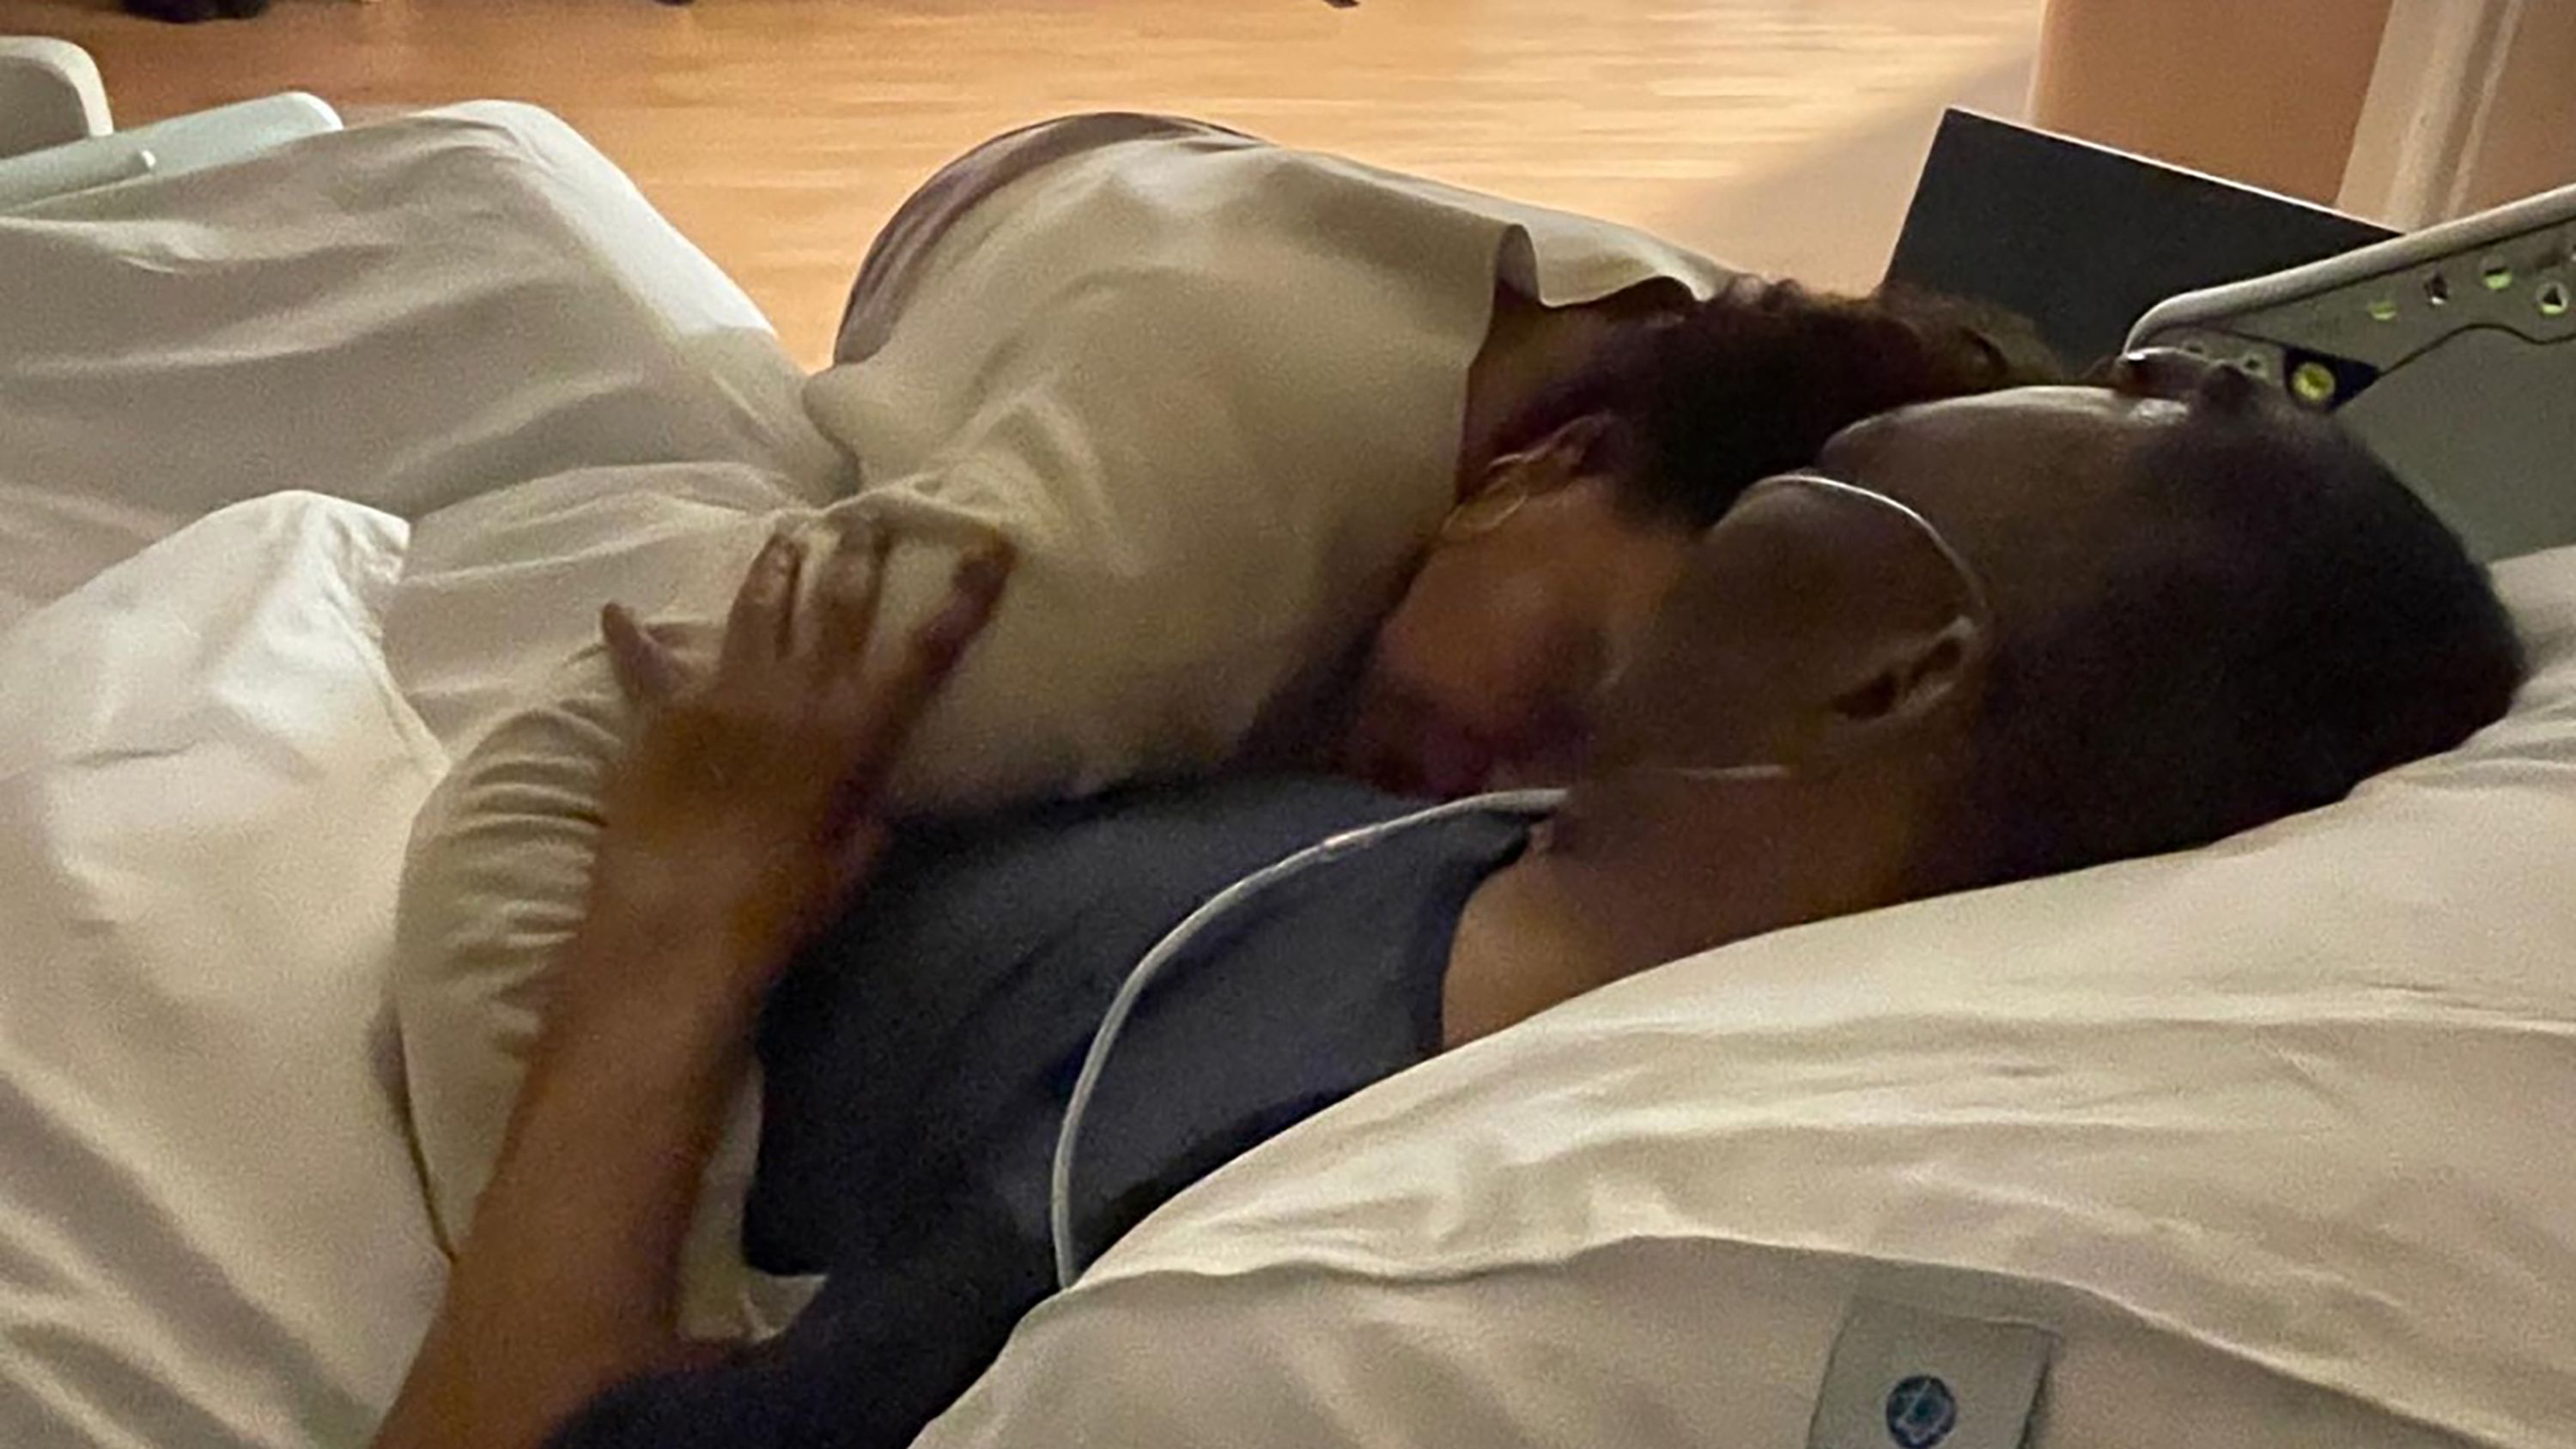 Pelé's son and daughter share moving photos with their father as they spend Christmas at his side in hospital